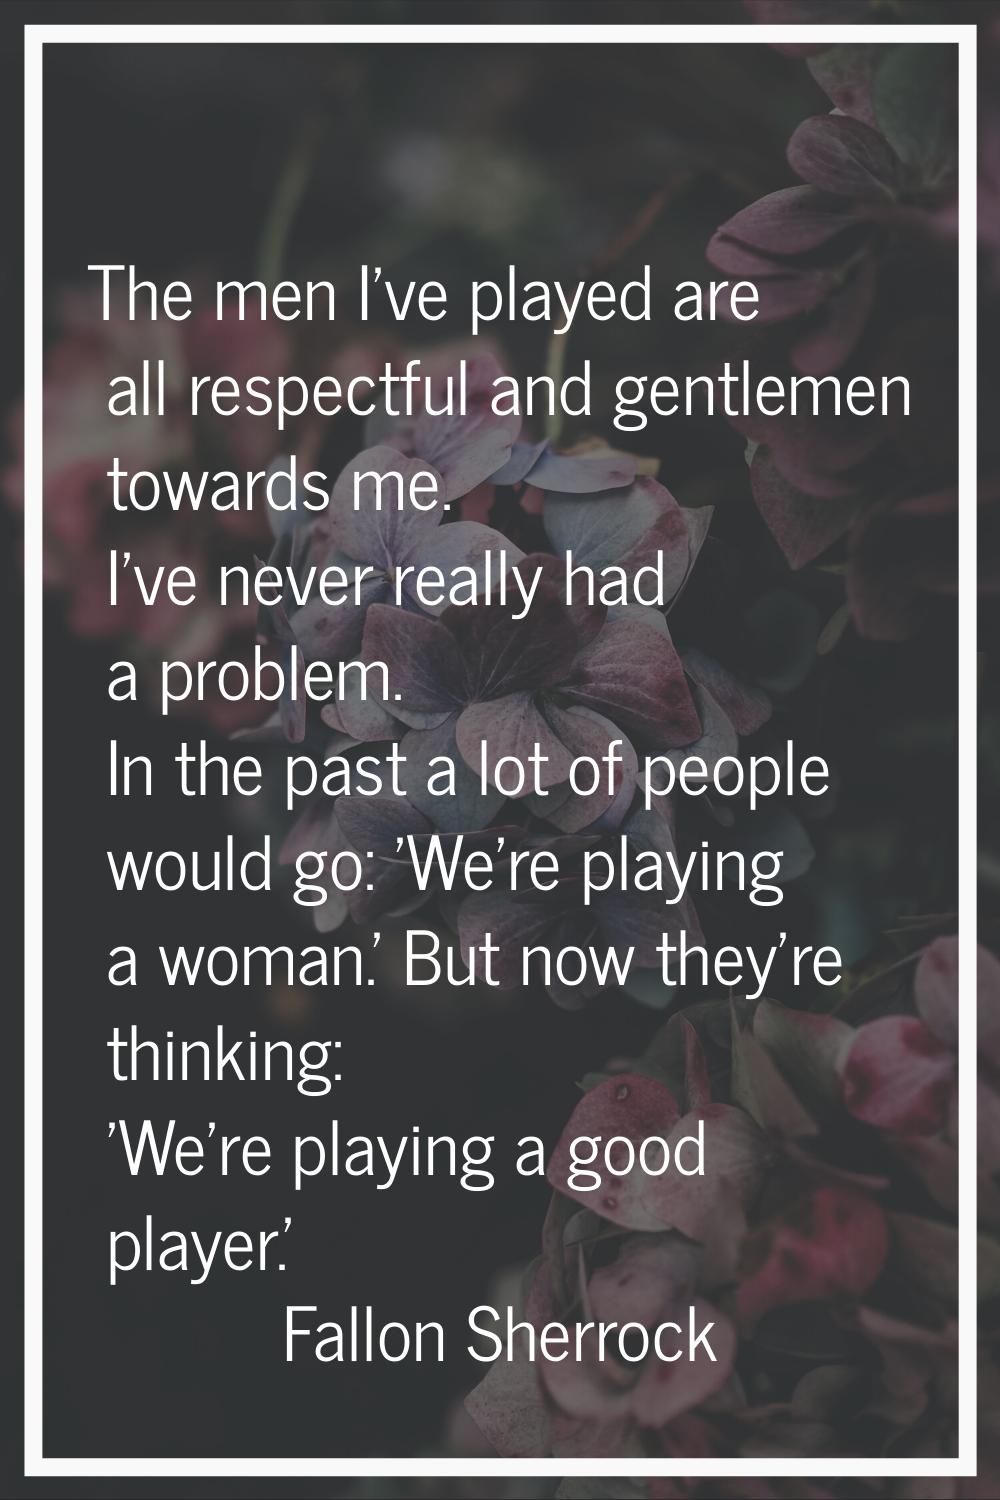 The men I've played are all respectful and gentlemen towards me. I've never really had a problem. I